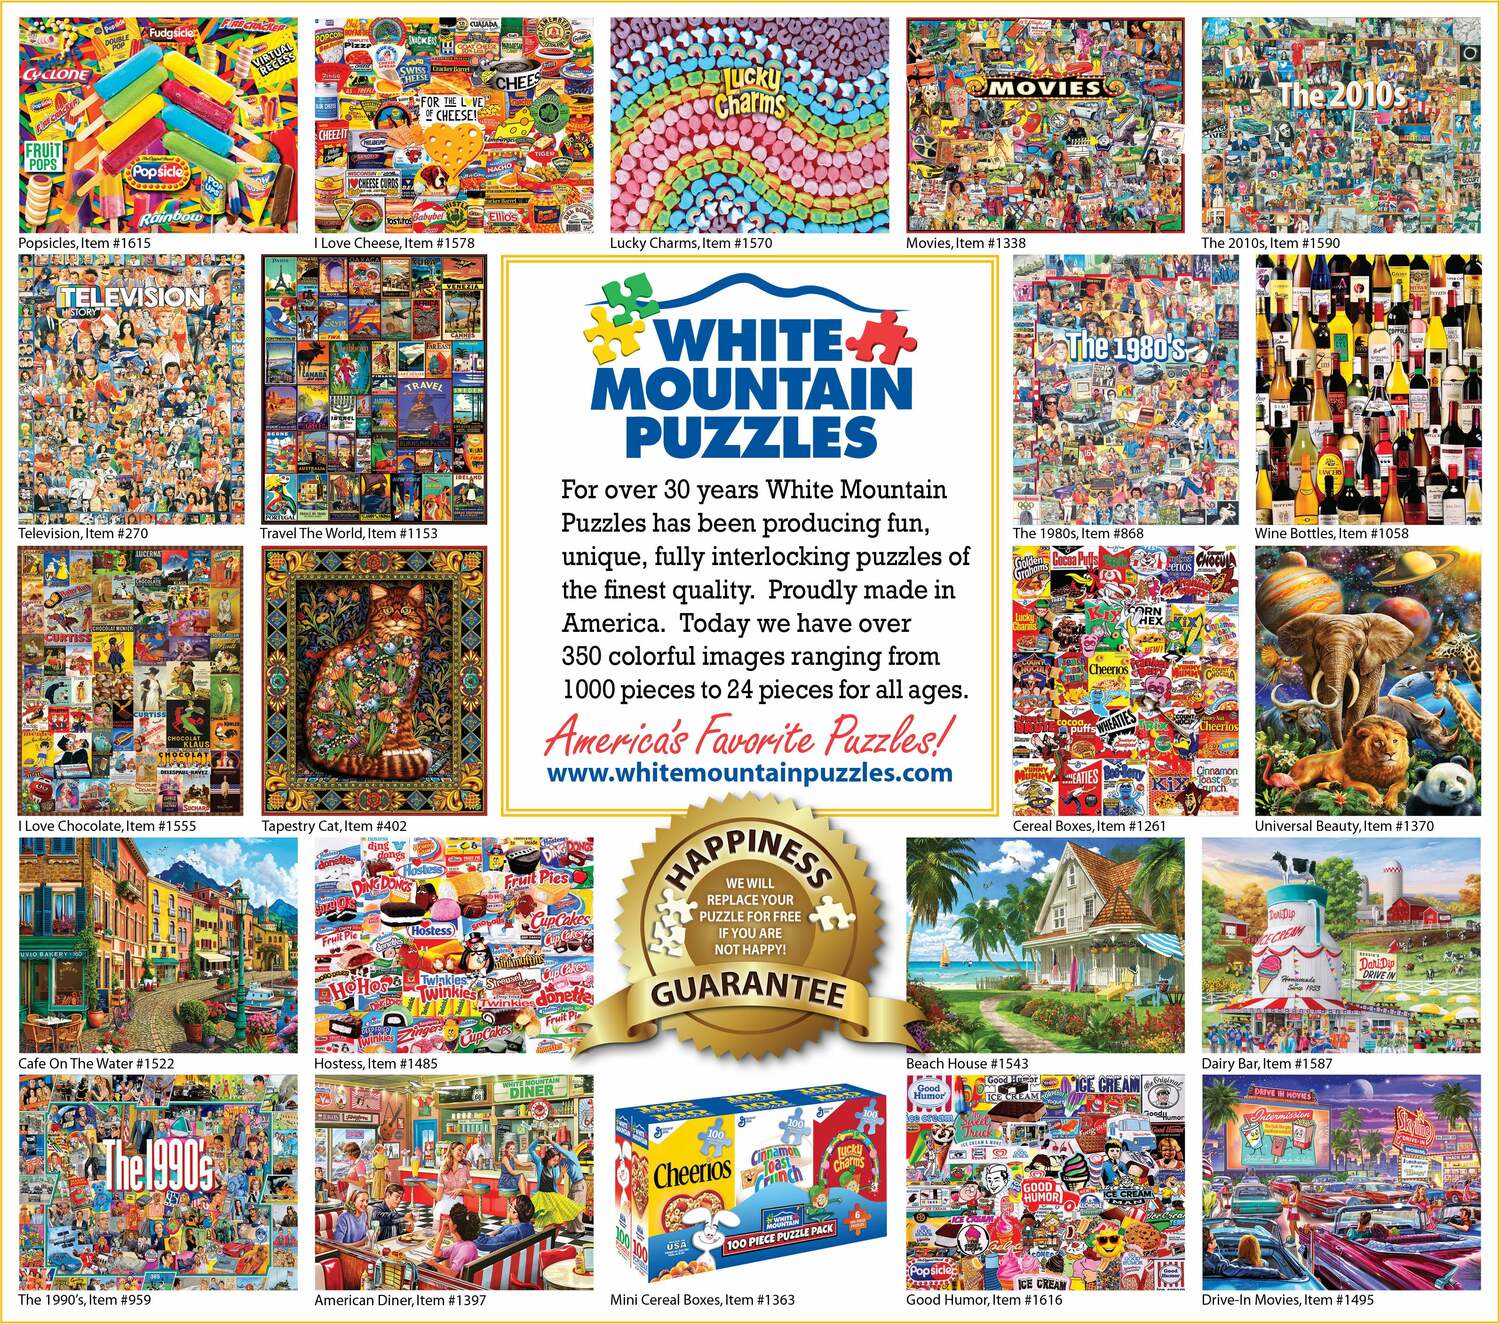 I Had One of Those - 1000 Piece - White Mountain Puzzles